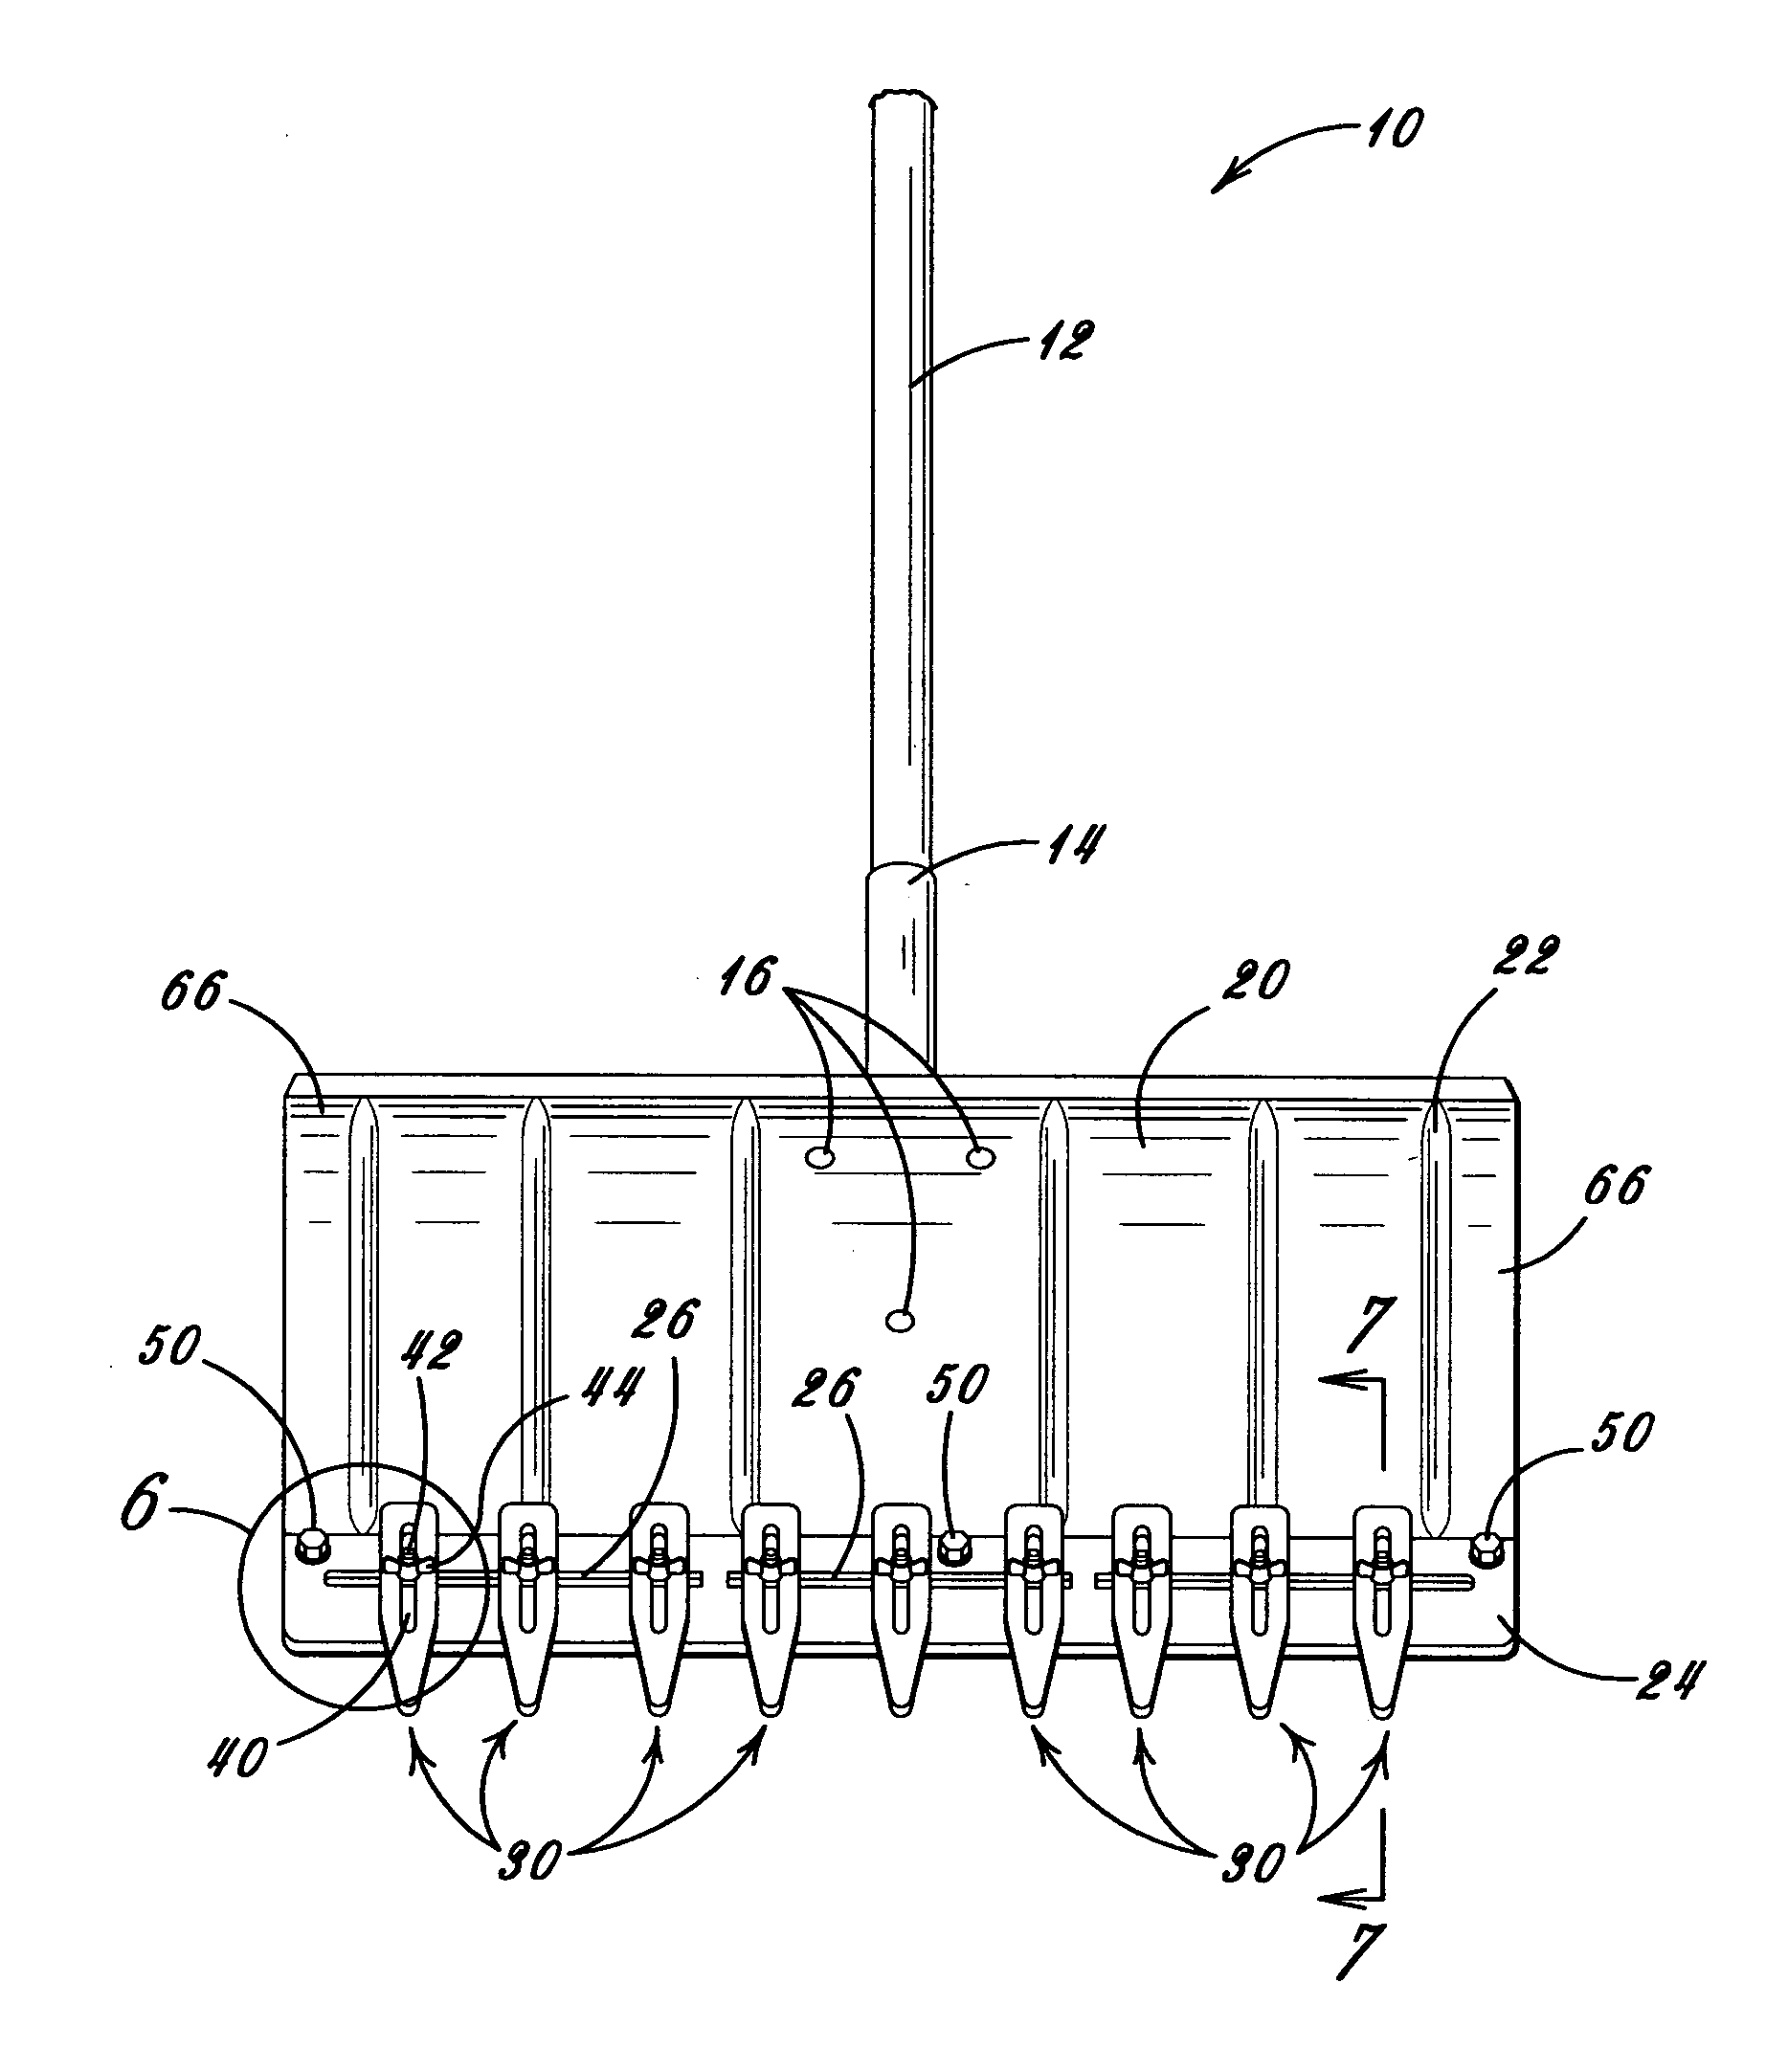 Hand manipulated pusher apparatus with adjustably spaced teeth for cleaning uneven corrugated surfaces